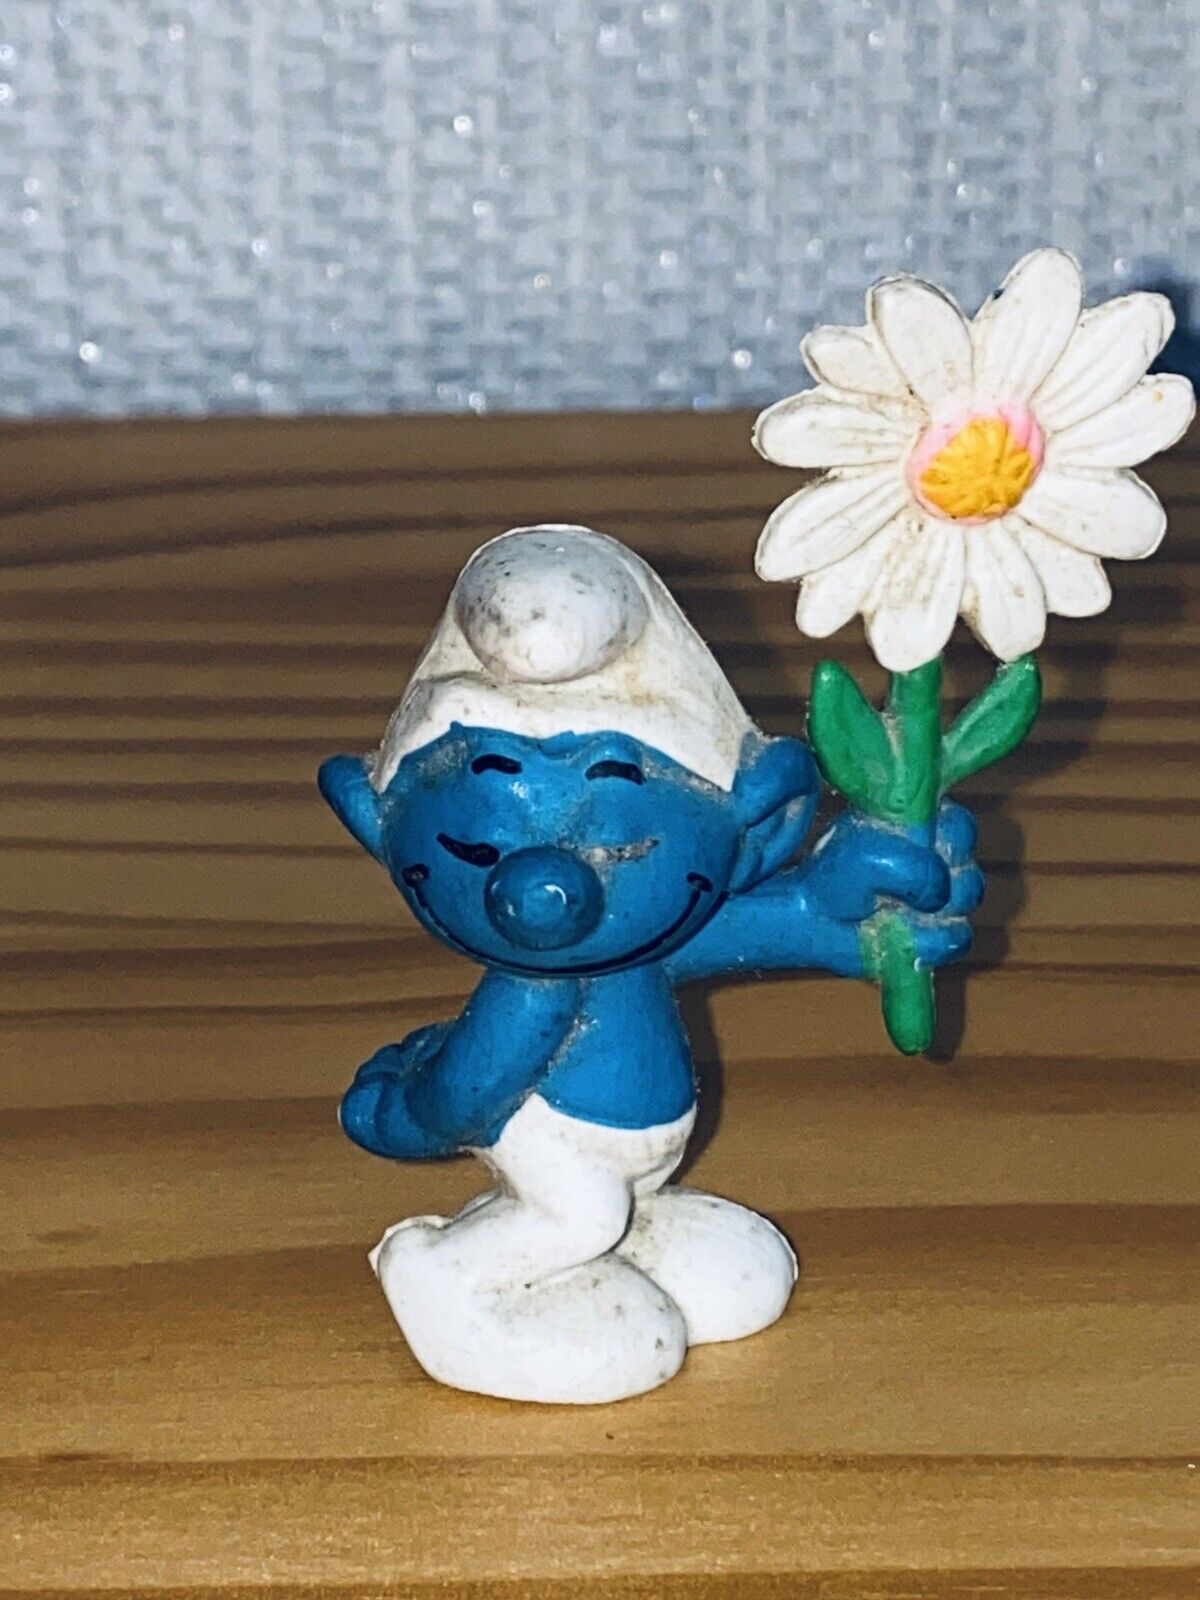 Rare 20076 Courting Smurf White Flower 2” Vintage Figurine Figure Toy Bully